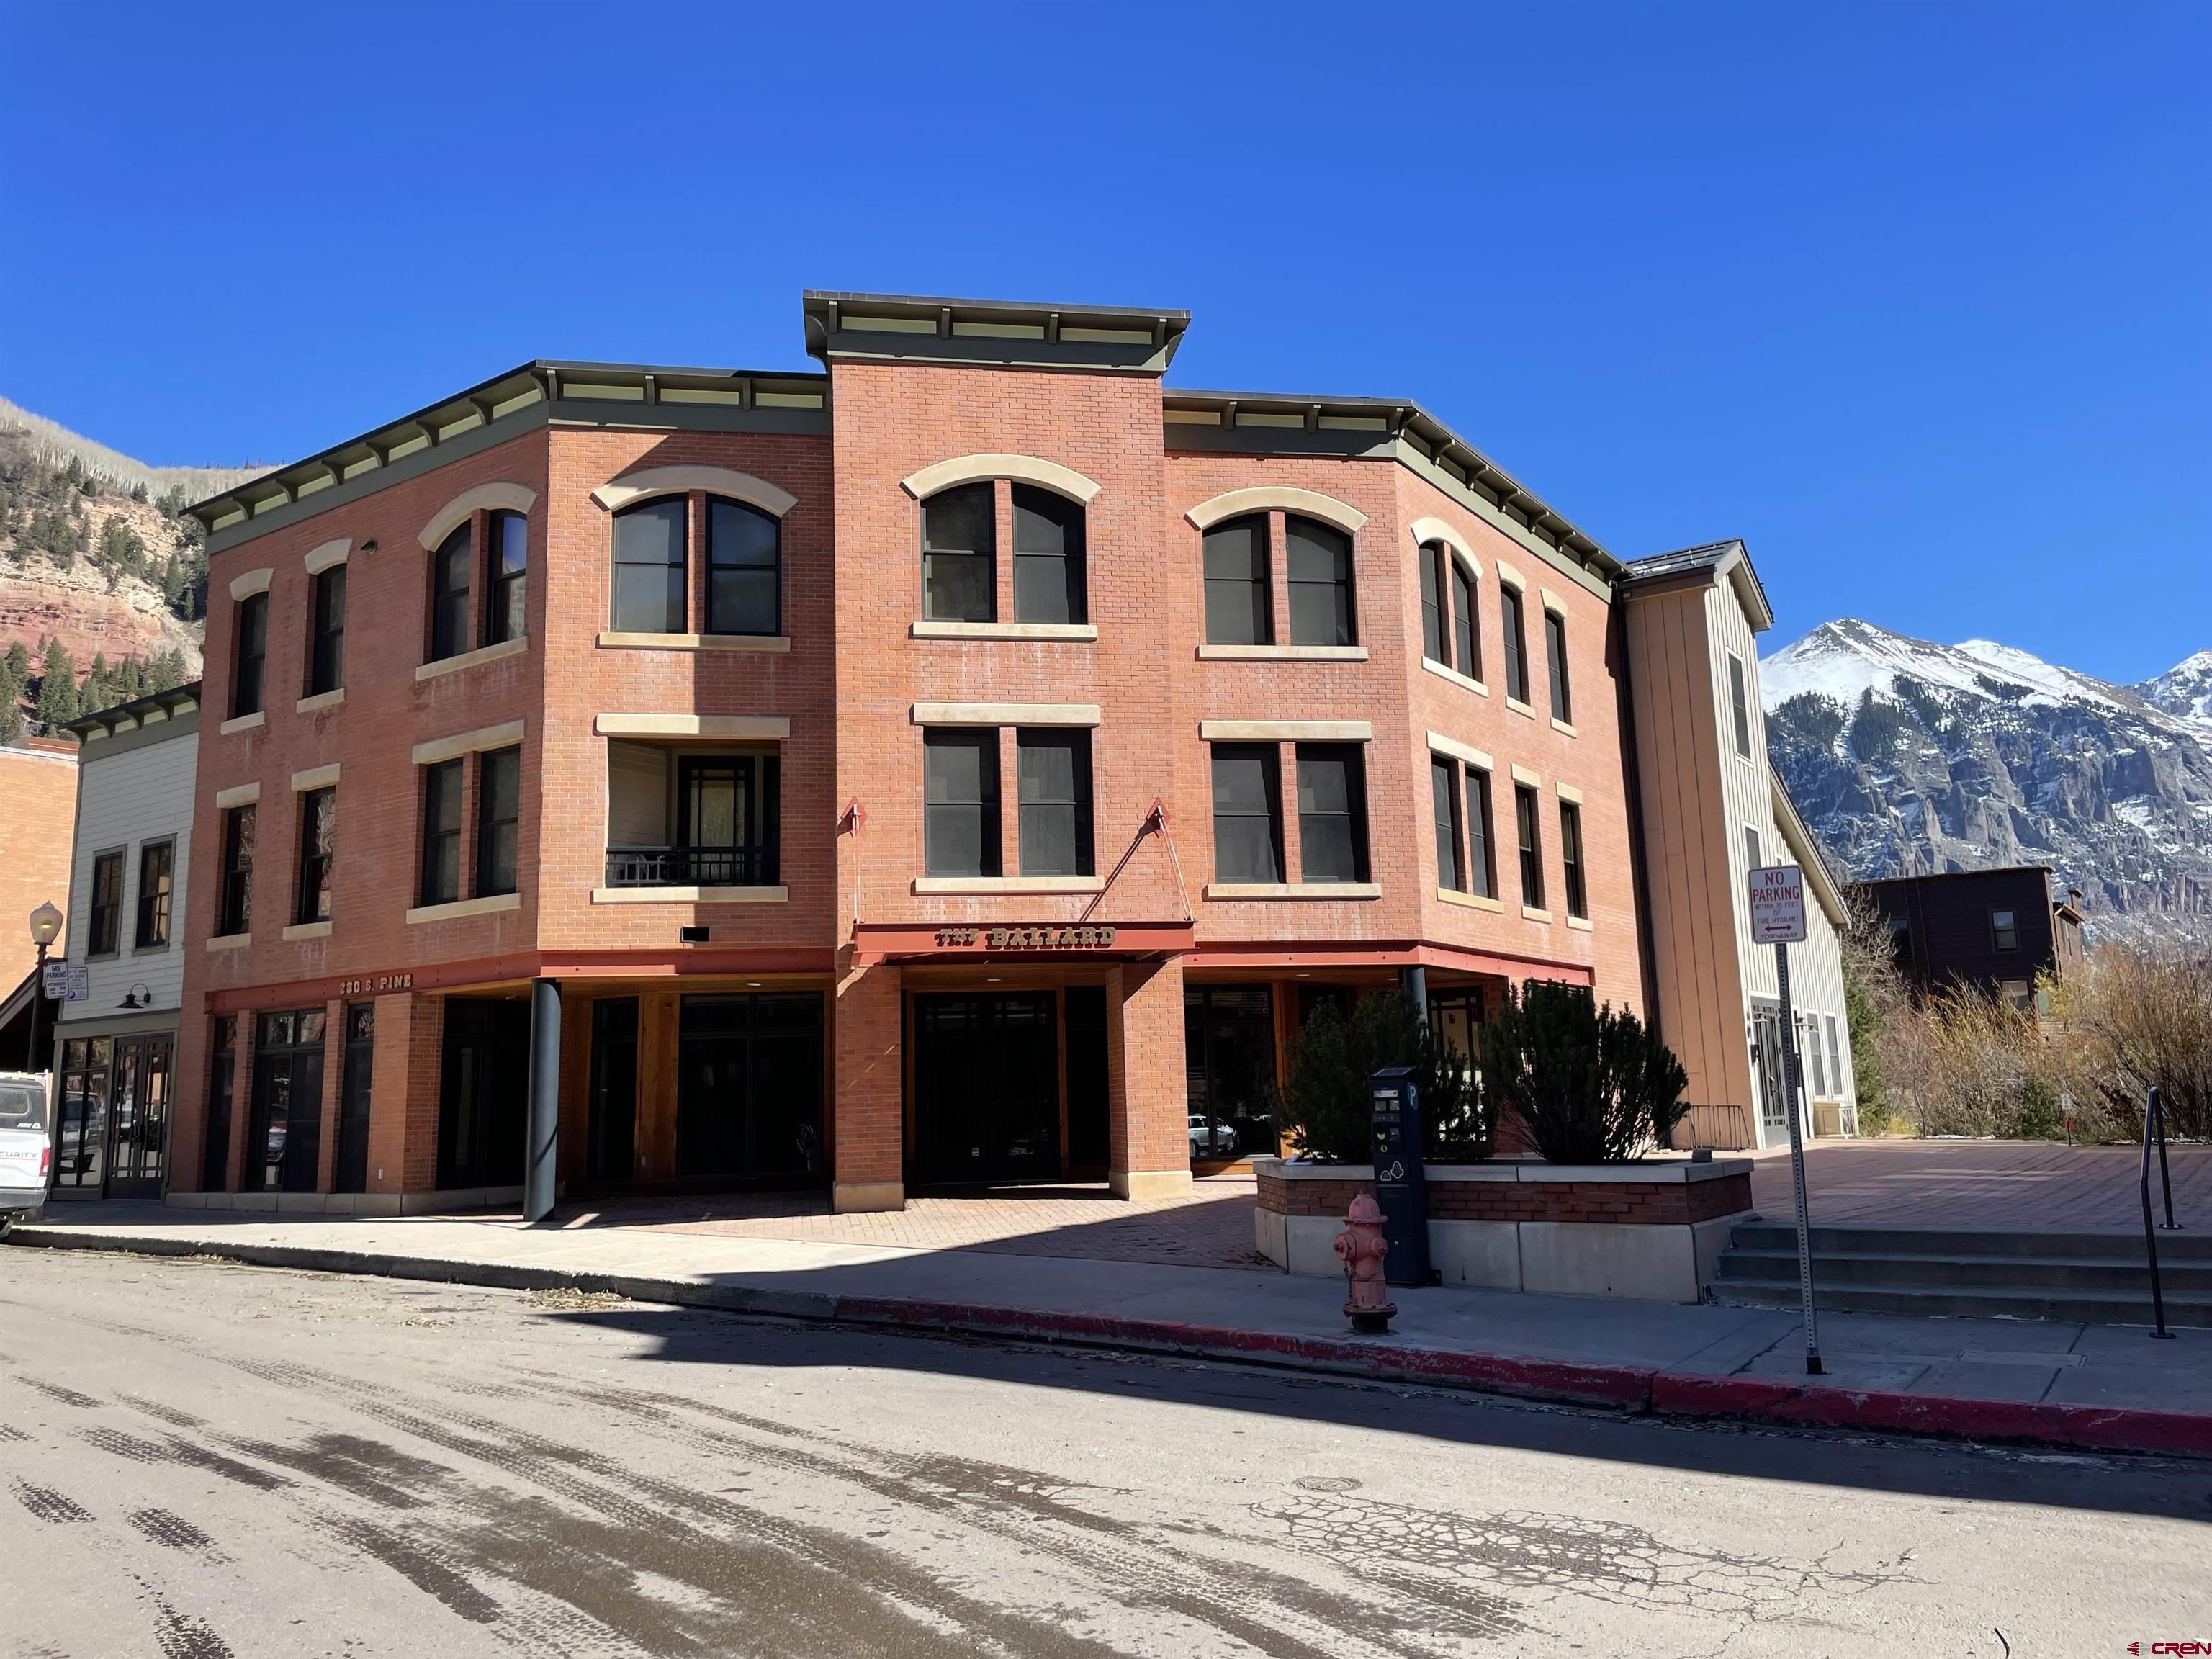 Rare opportunity to own prominent commercial space in Telluride. This space is near Main street with great street level windows that are visible to Gondola foot traffic, diners, and shoppers. Very centrally located two blocks from Gondola and Main St. and is near River and Bear Creek Trails. This property has 2 office spaces that share a bathroom. Current month to month lease in one space, and the other space is unoccupied with versatile possible uses. There is a southern plaza and 3 parking spaces, 2 assigned in garage and one exterior space allocated to the commercial unit. Call/text Broker. Please do not disturb tenants.